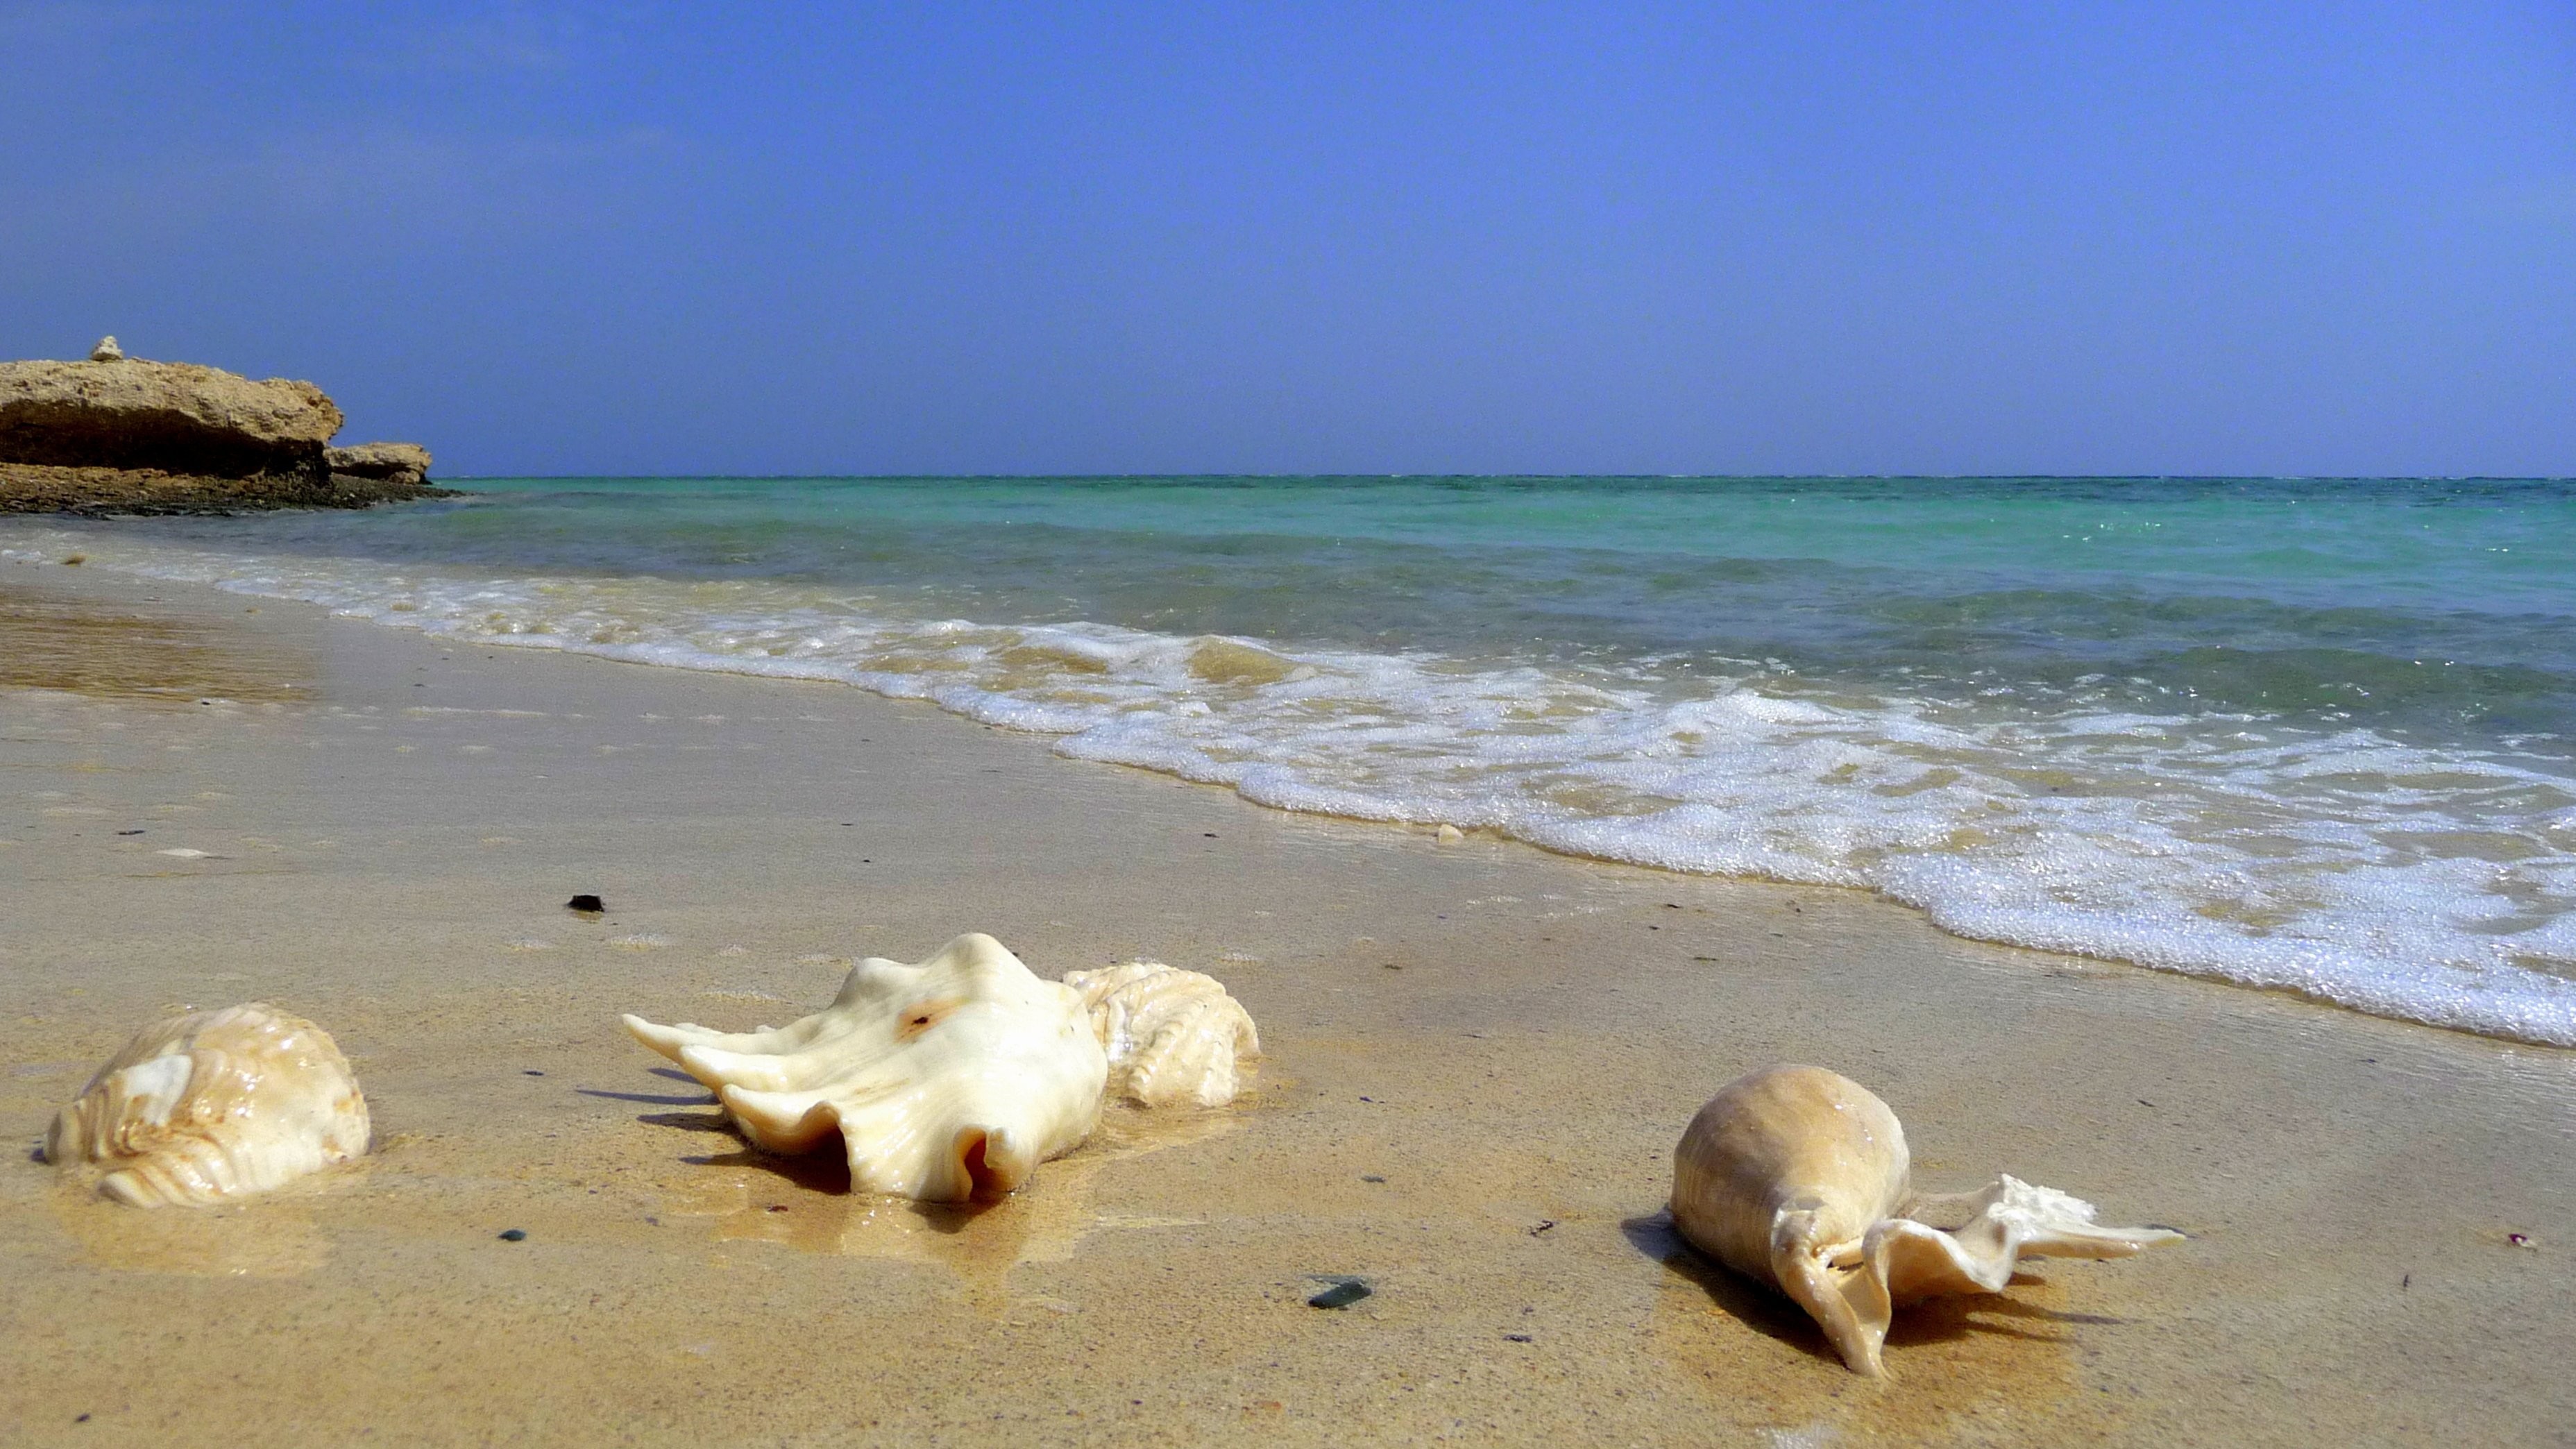 3712x2088 Seashells on the beach in the resort of El Quseir, Egypt